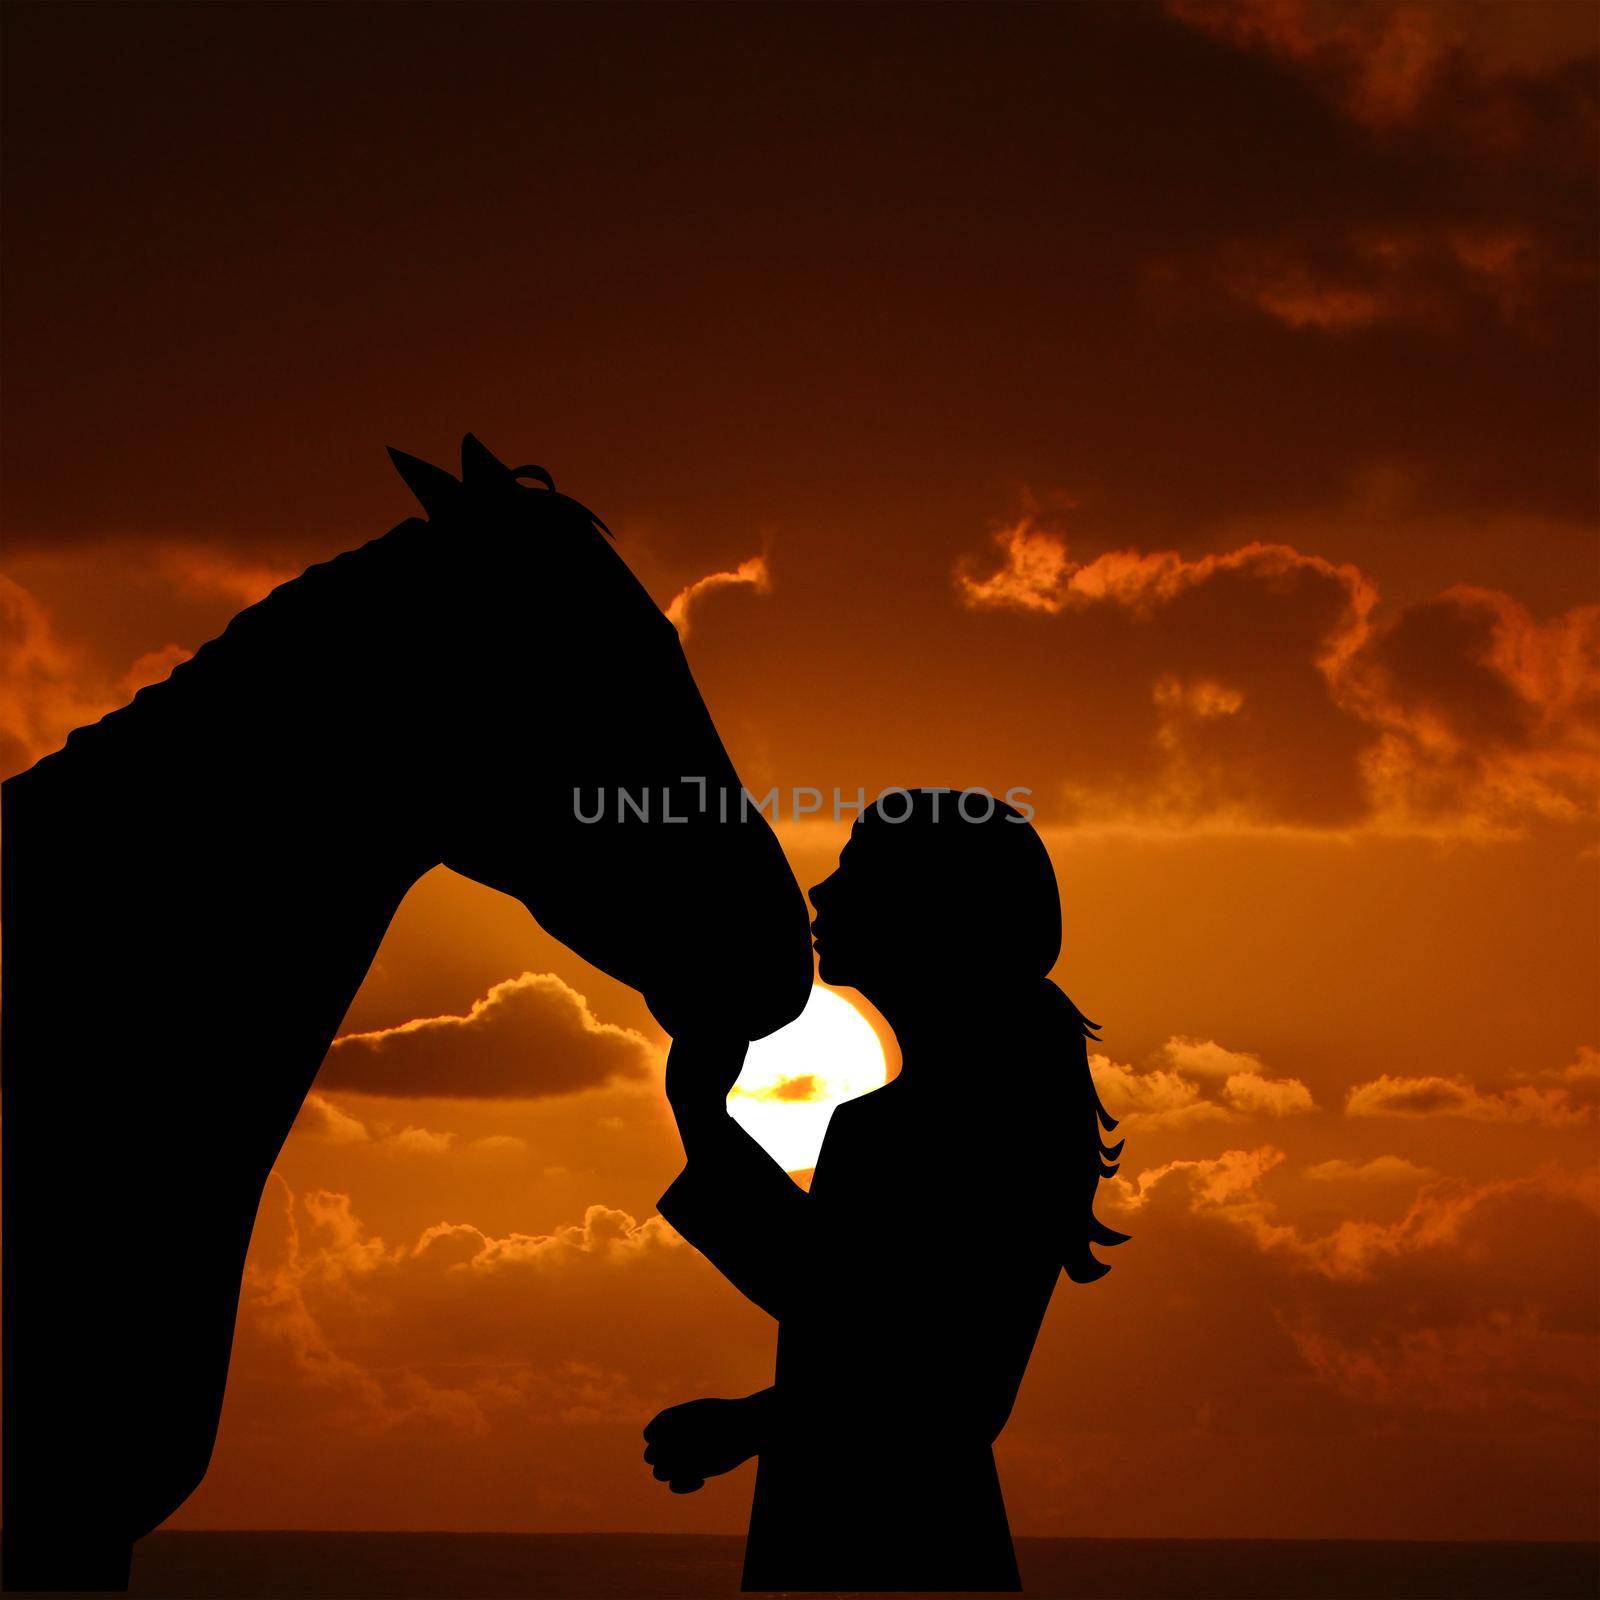 Silhouette of a young girl with horse giving him a kiss at the sunrise by hibrida13